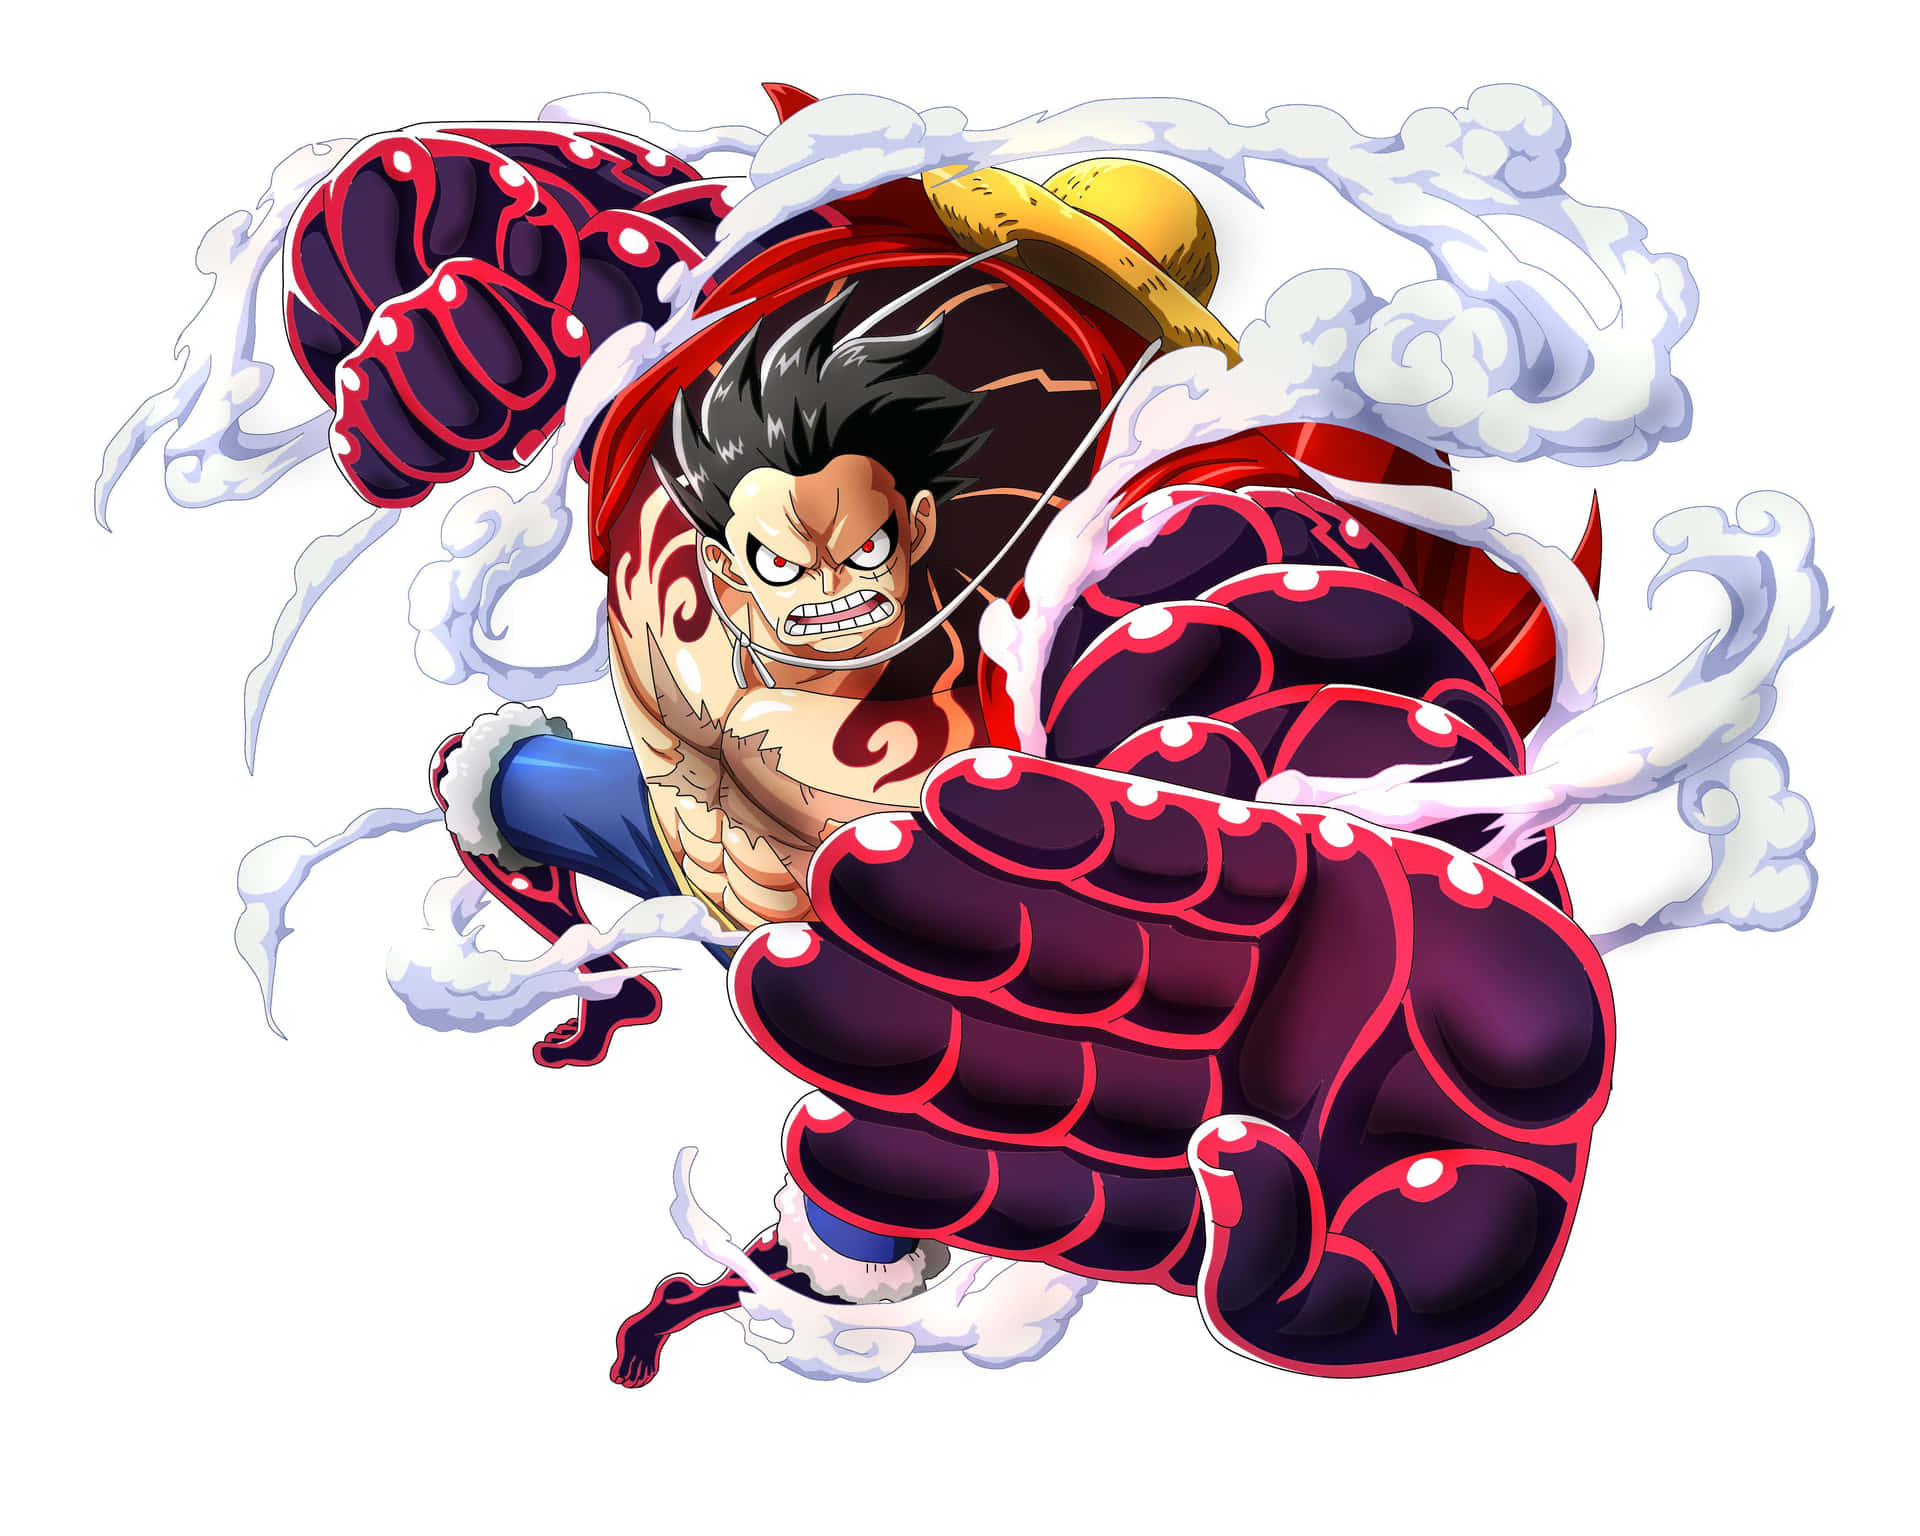 “Striking a pose with Gear 5, the latest form of Luffy” Wallpaper